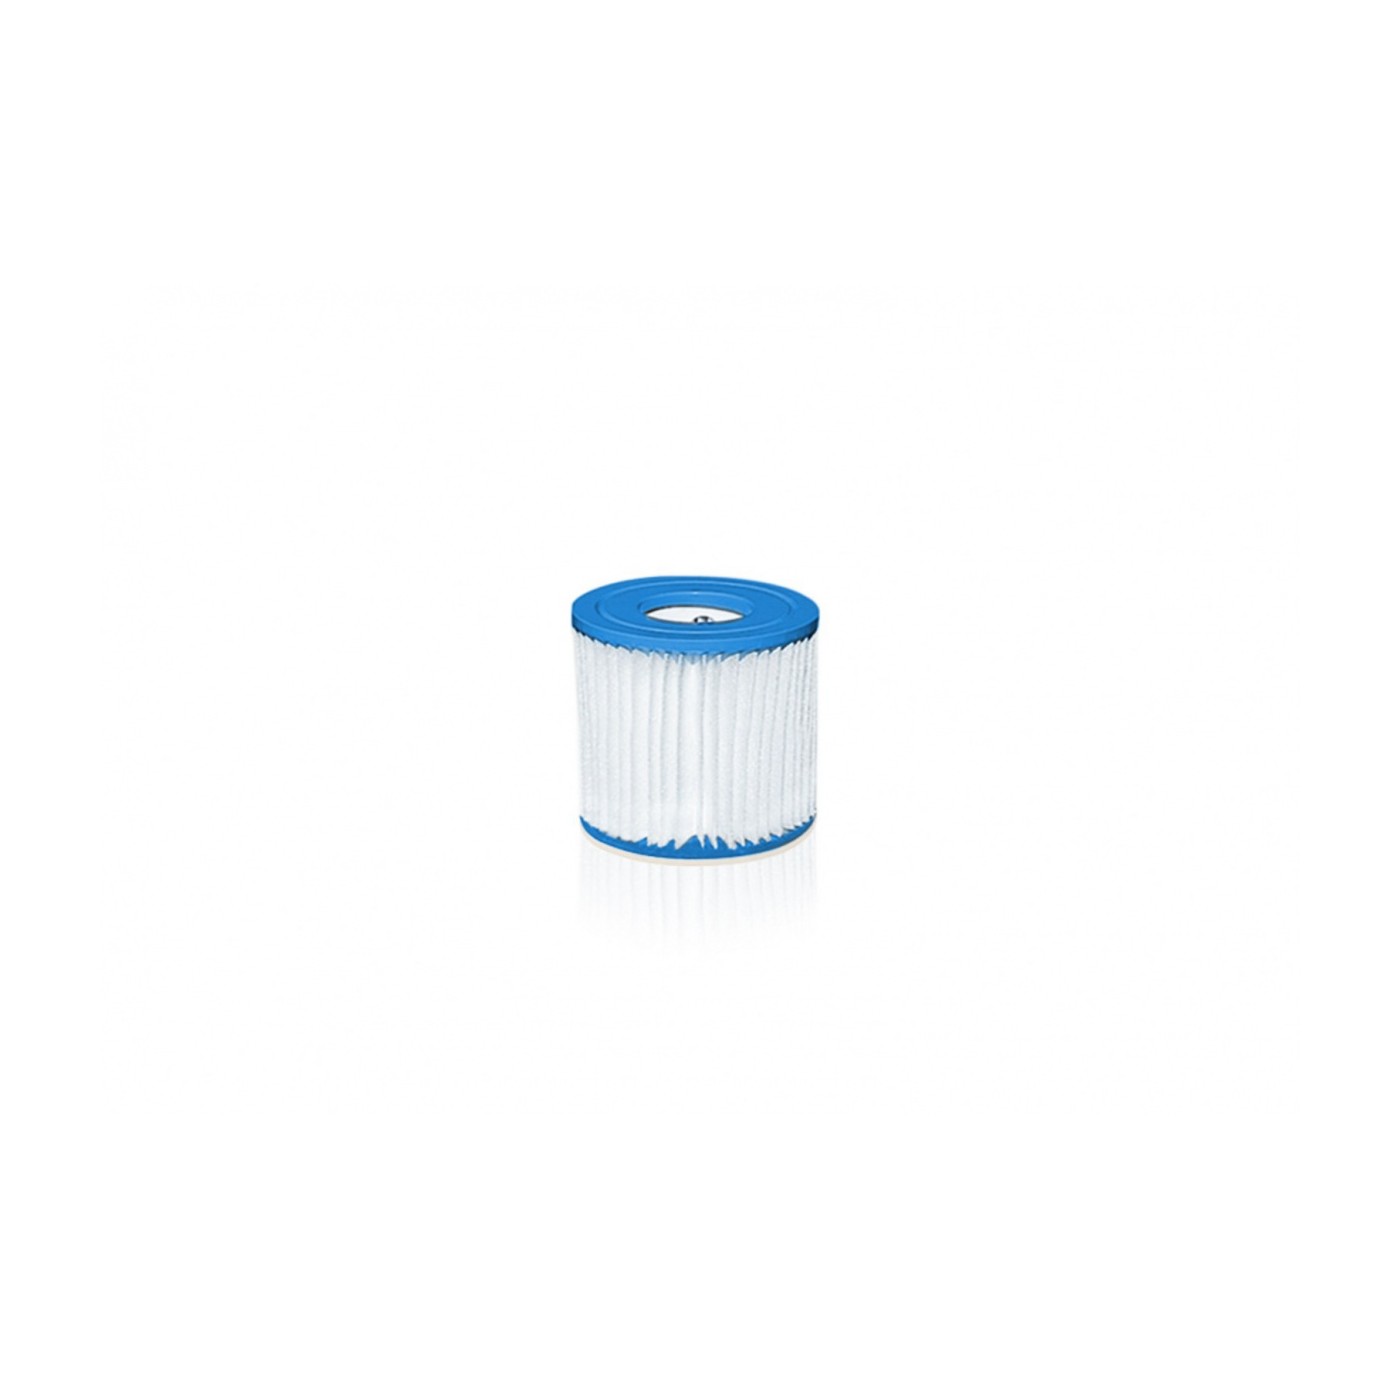 Filter for Pump, Type H